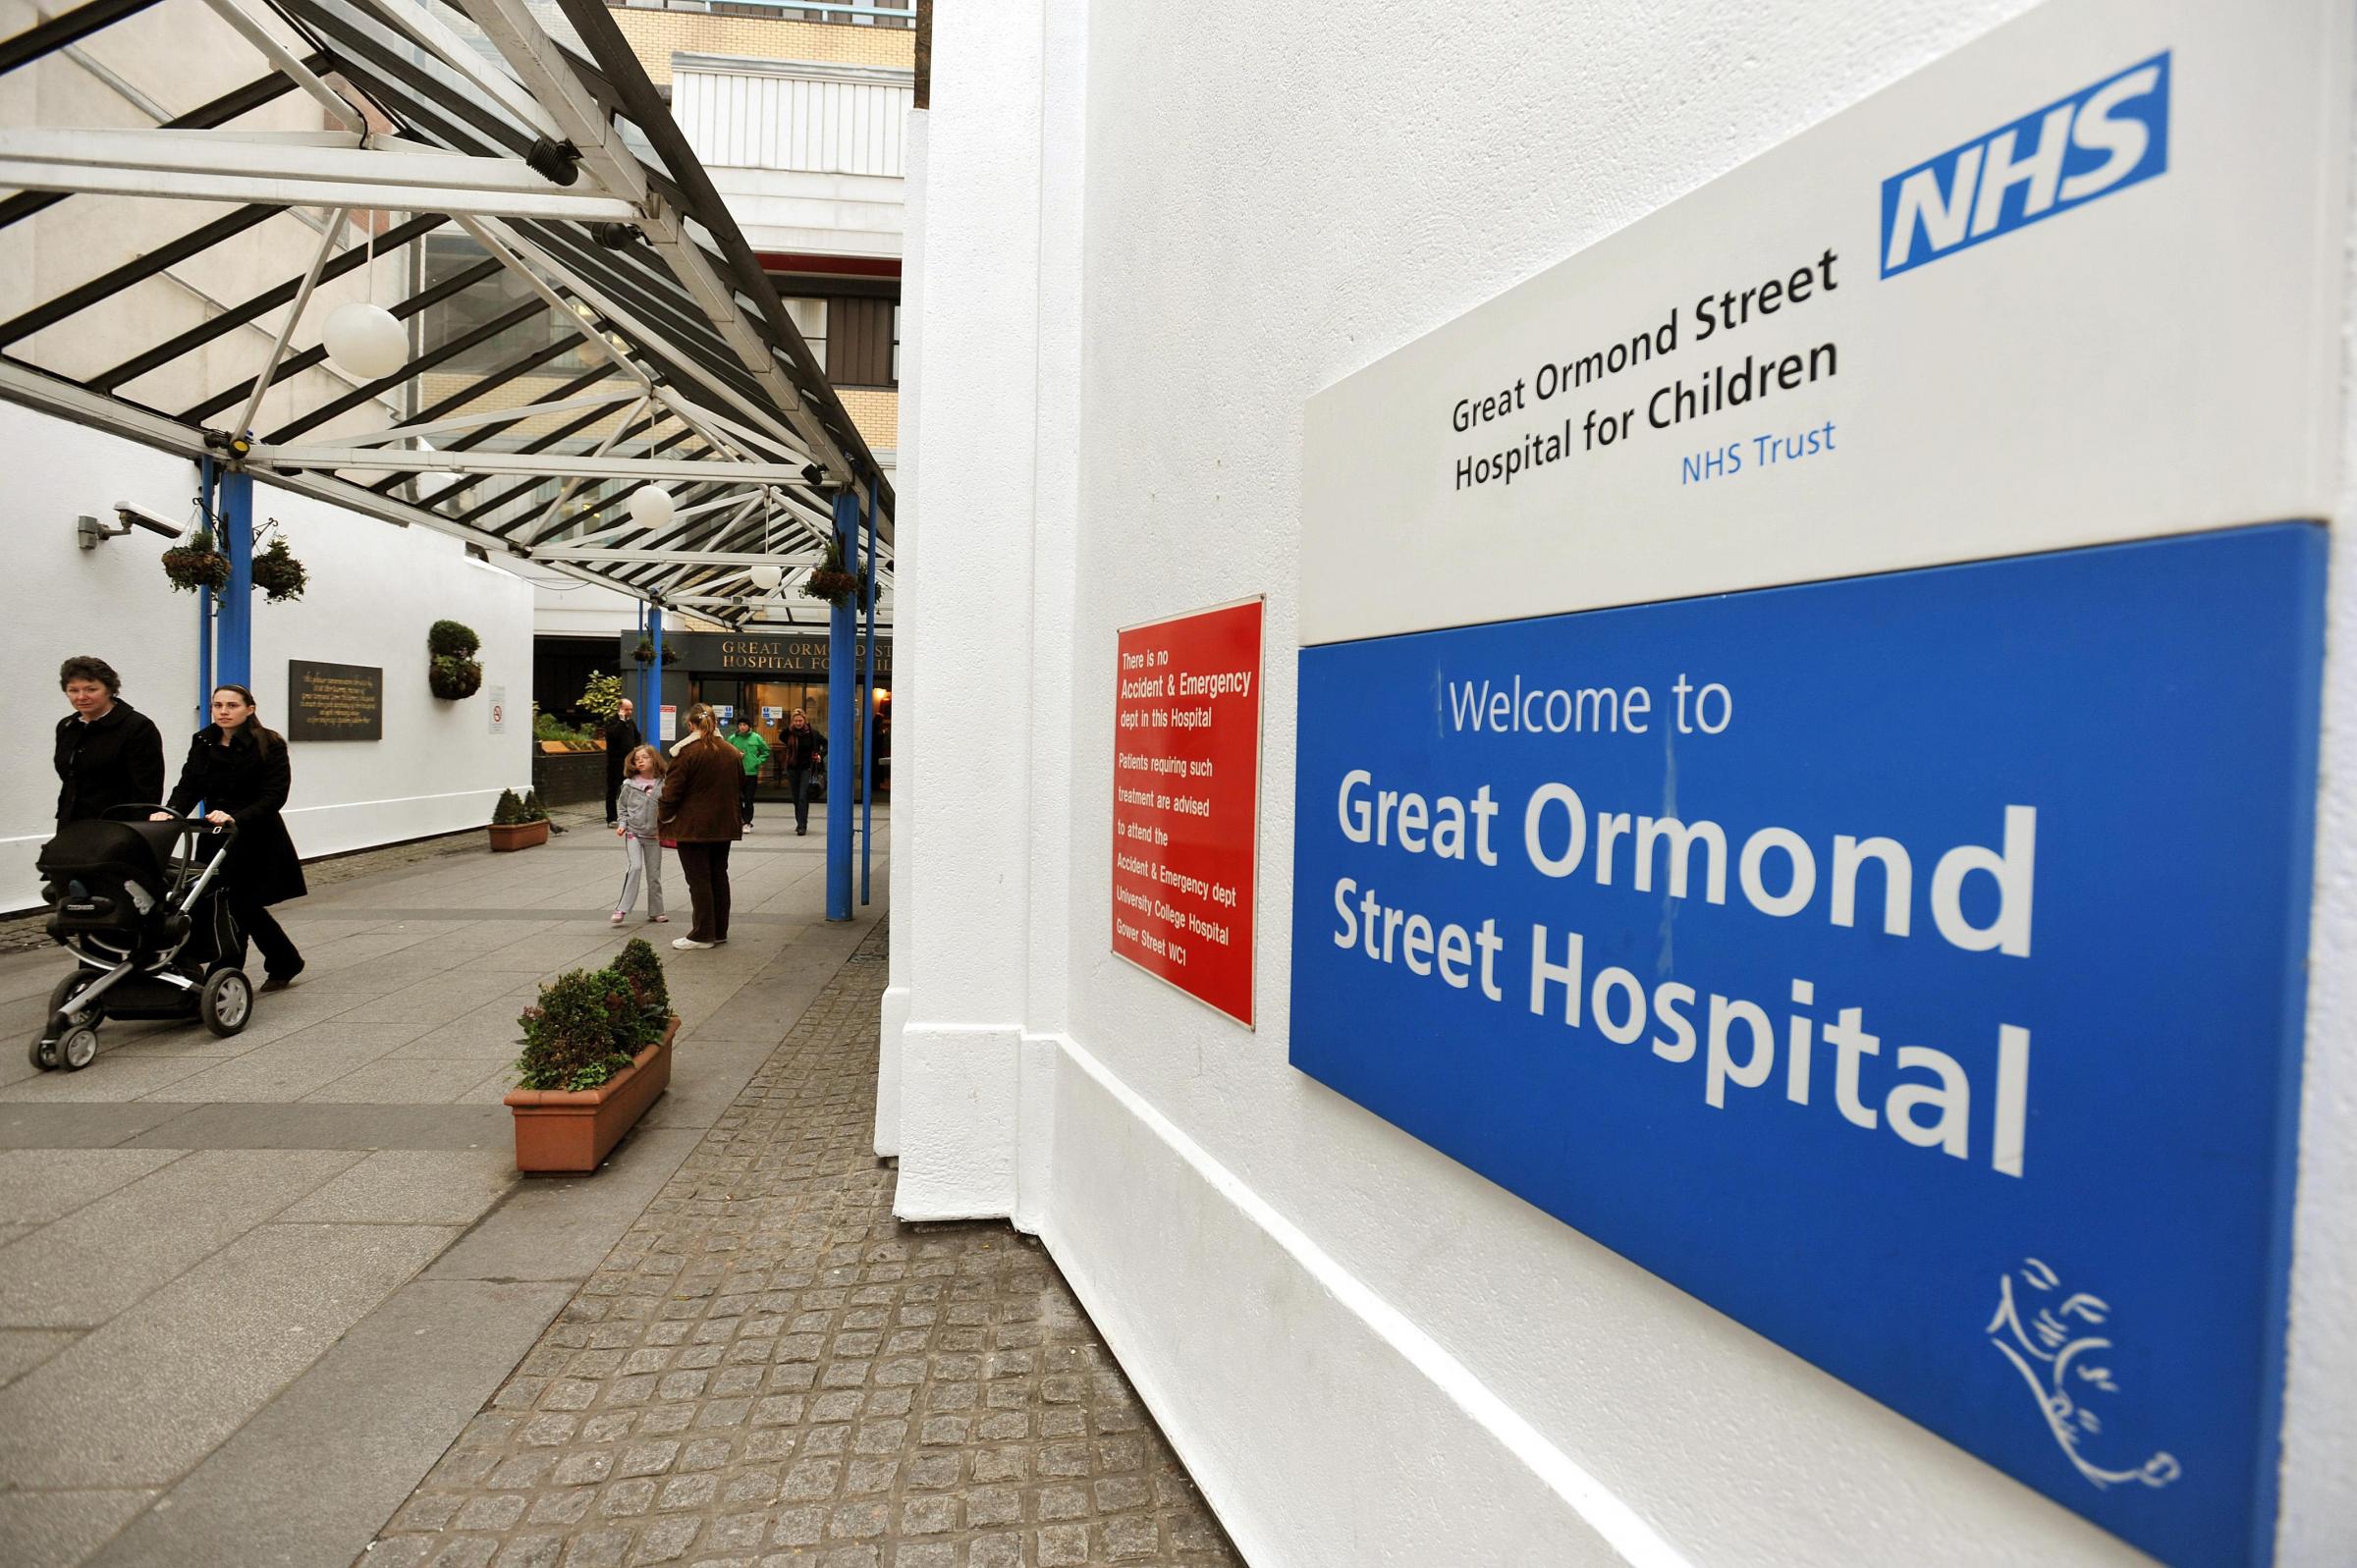 UPDATE: Attempted abduction of baby at Great Ormond Street Hospital in London